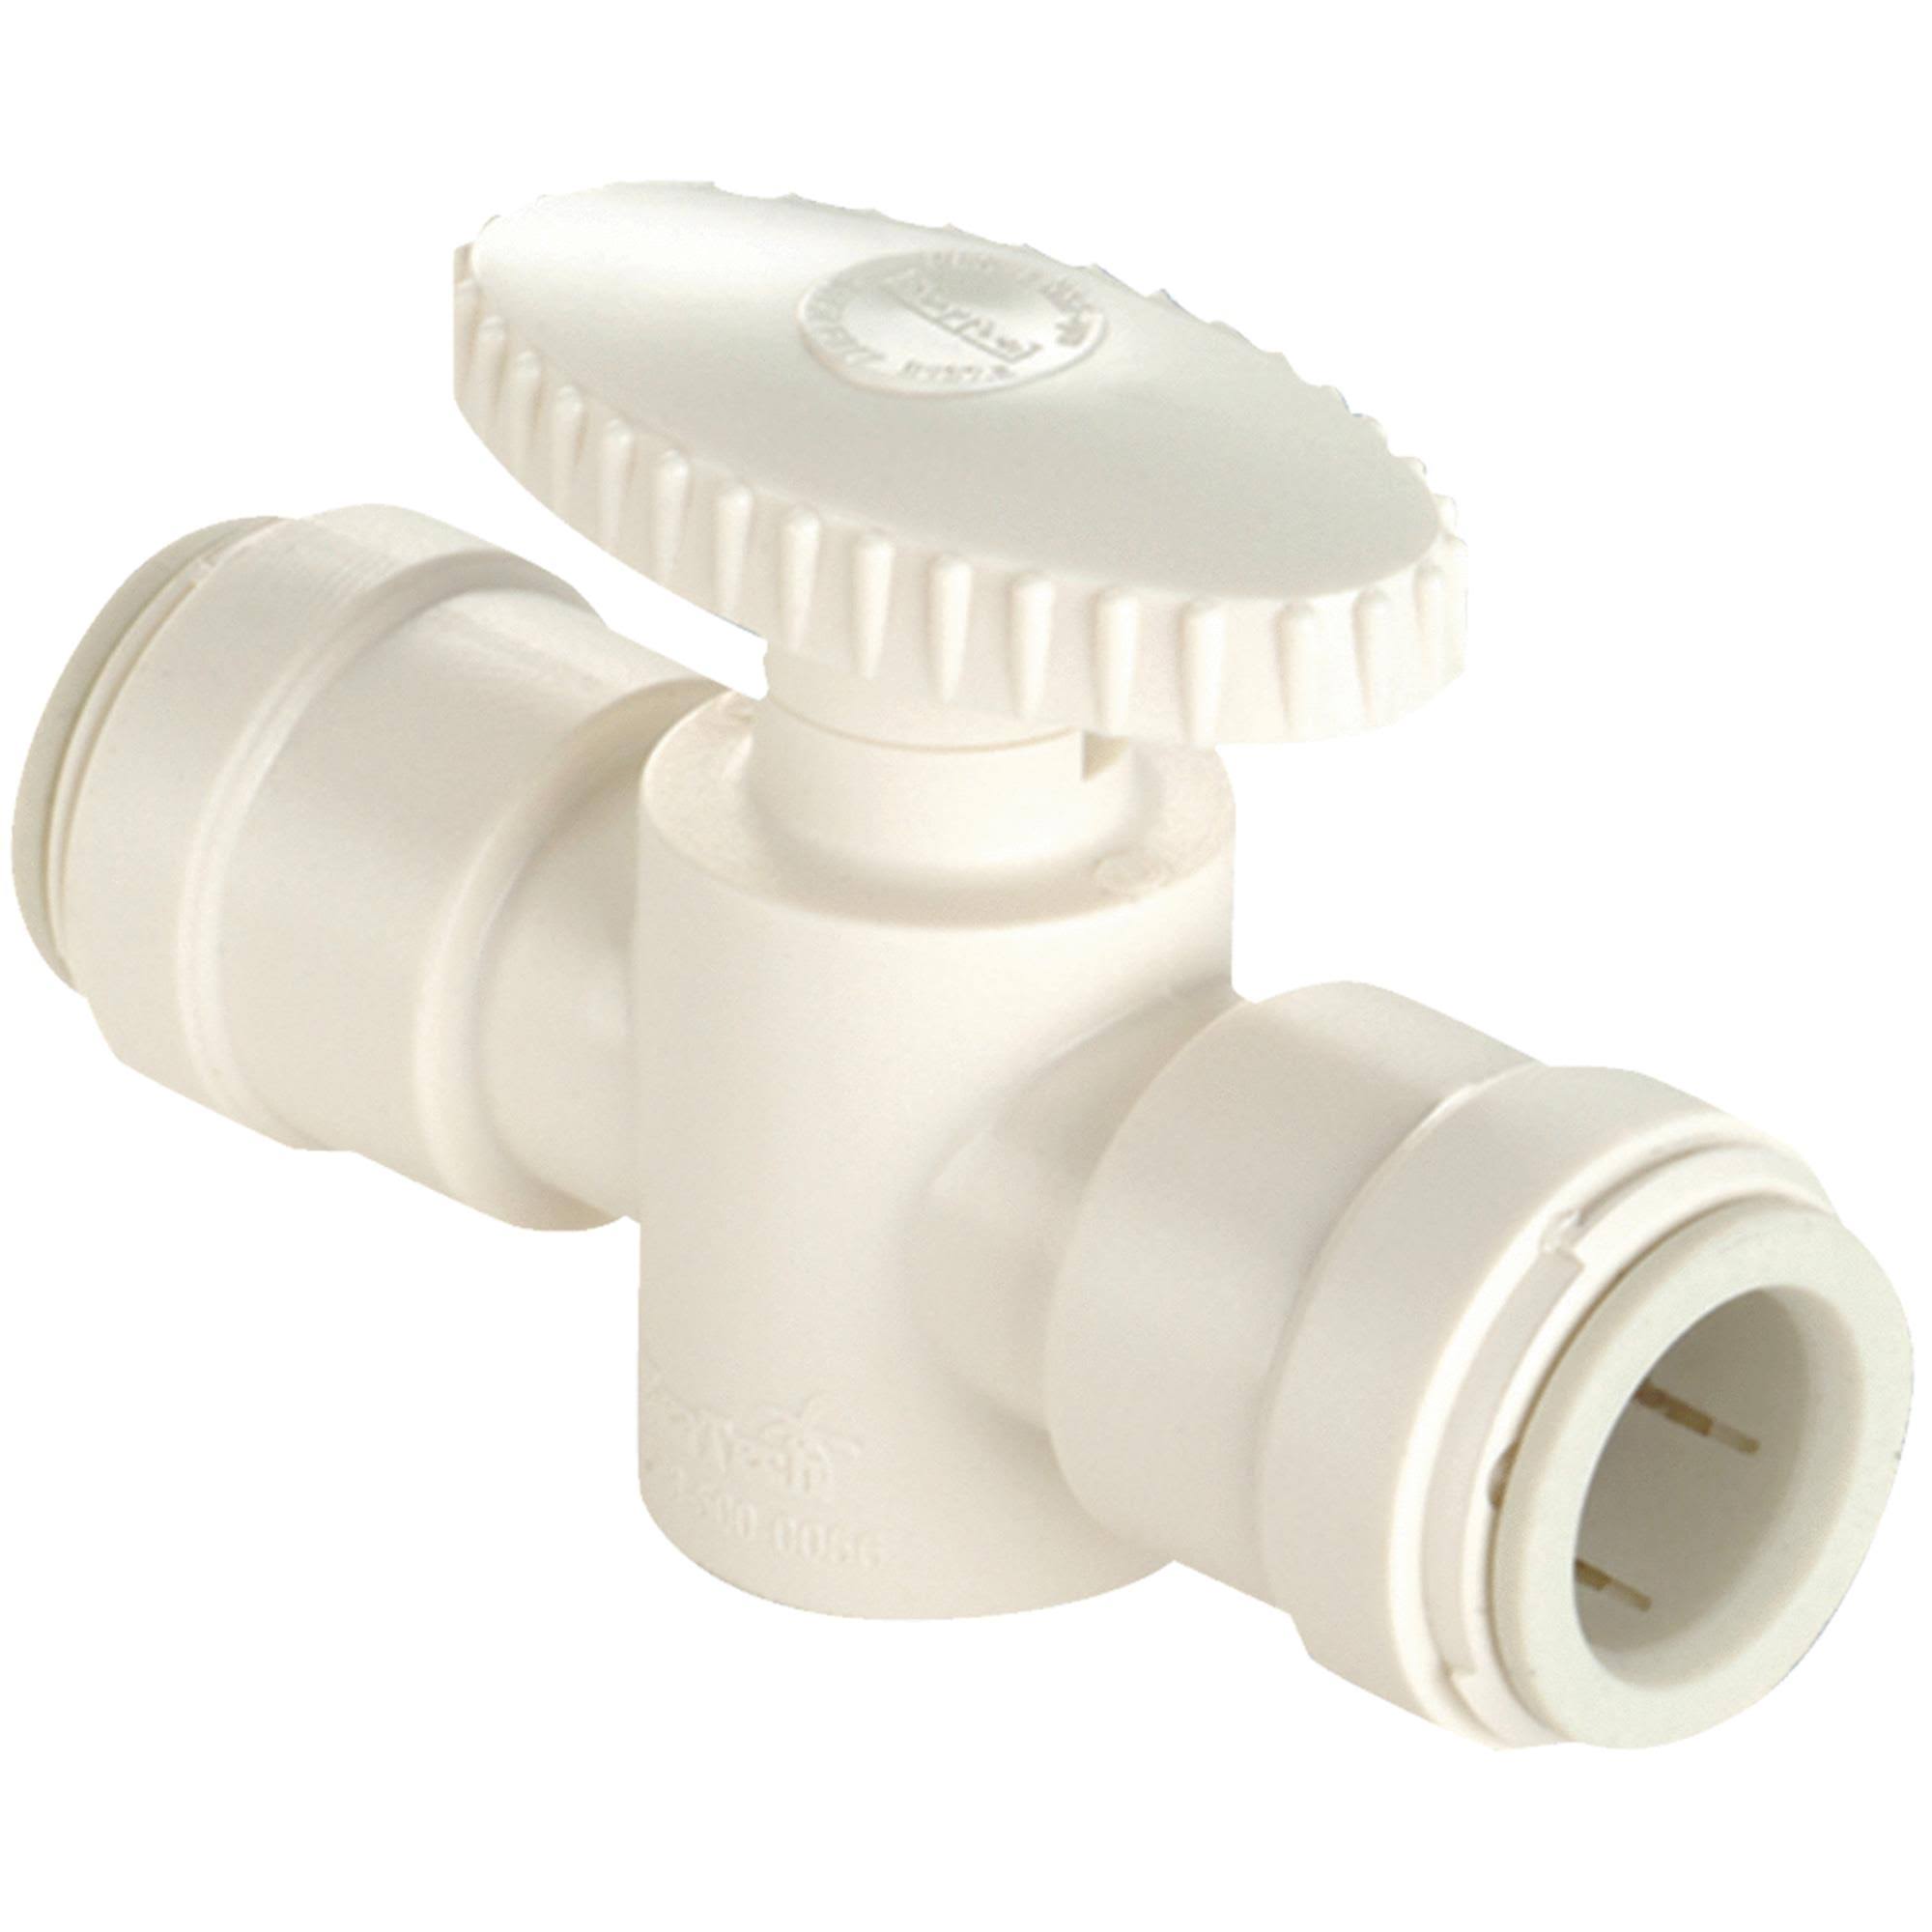 Watts P-450 Quick Connect Straight Stop Valve - 3/8in